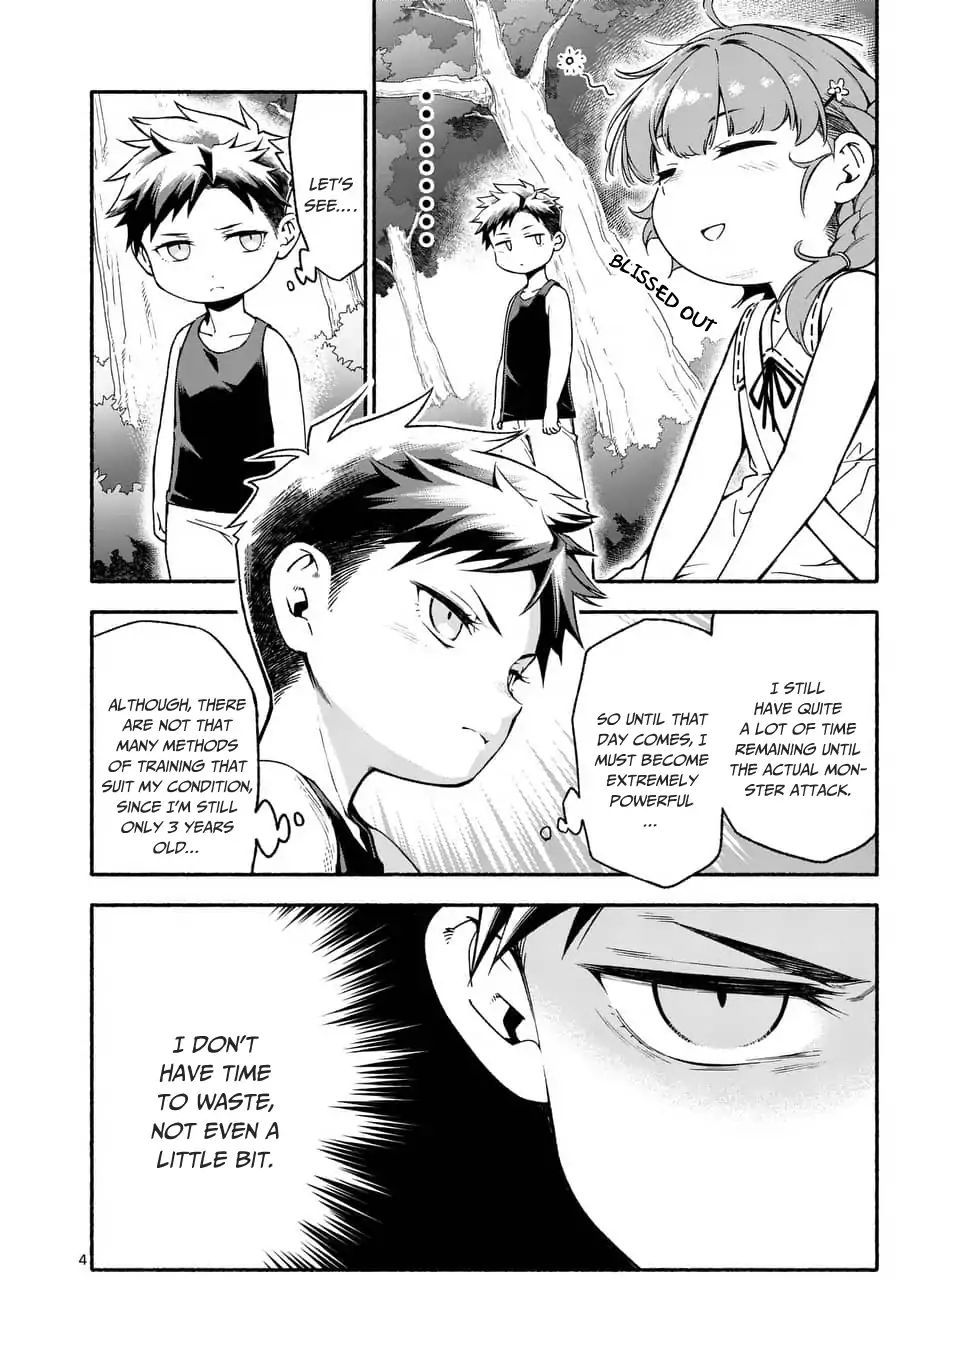 After Being Reborn, I Became The Strongest To Save Everyone - Page 5